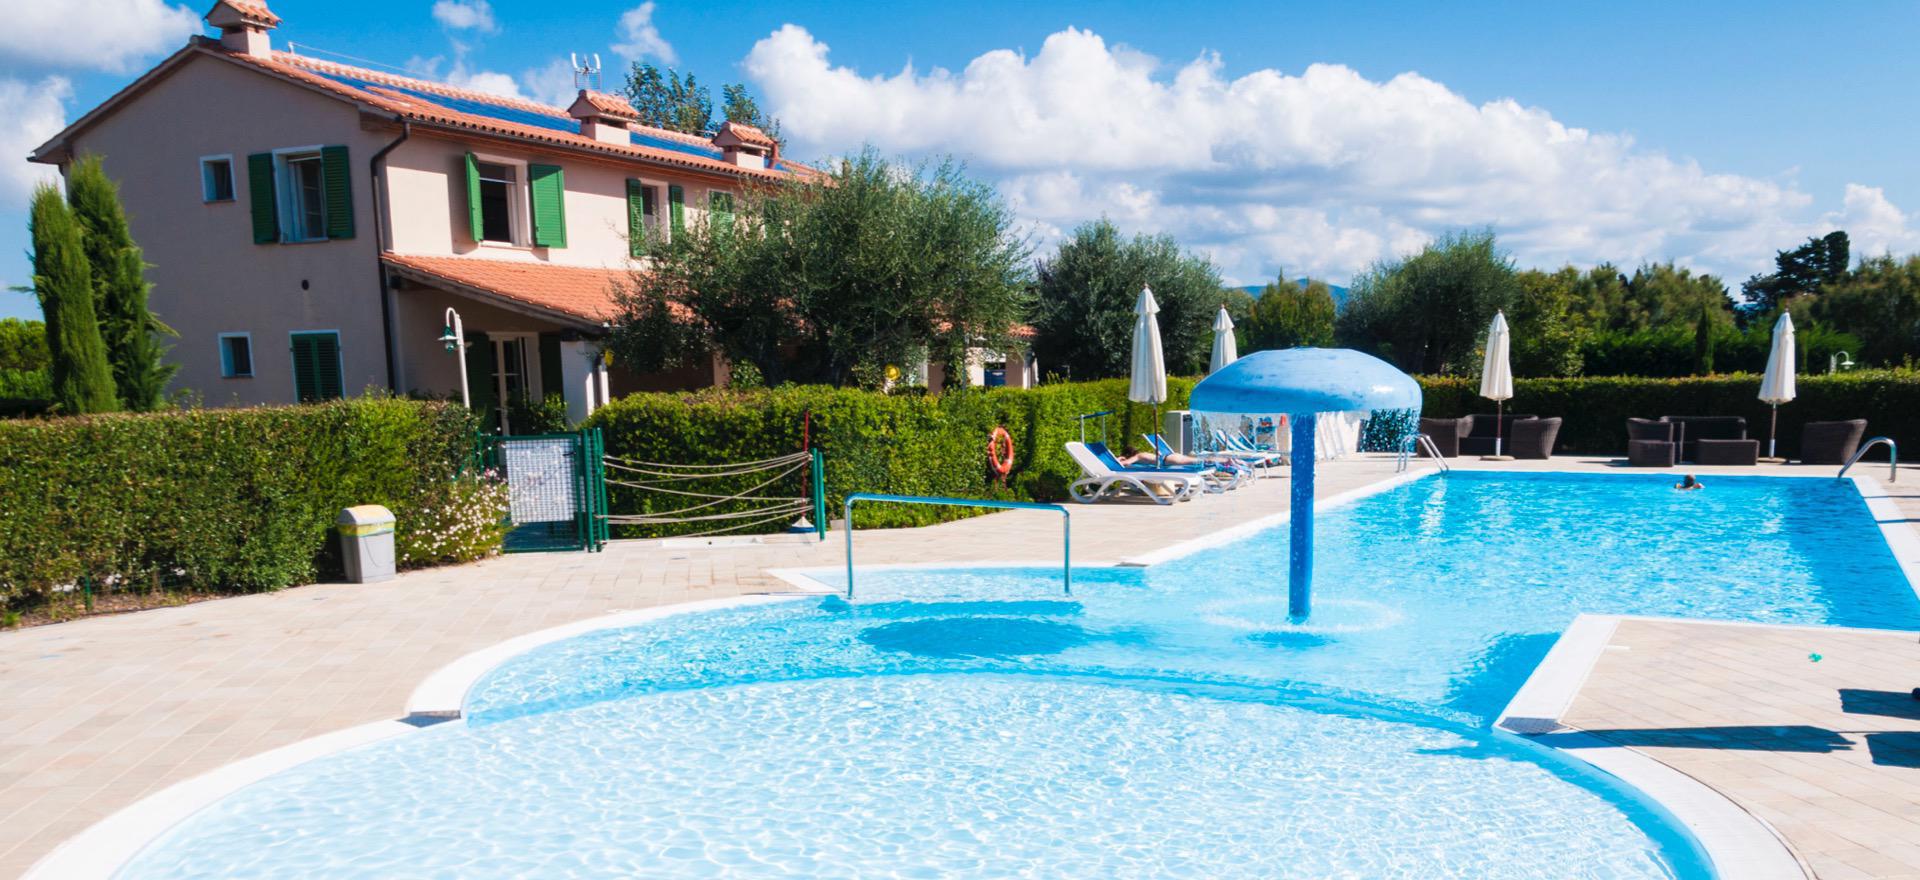 Agriturismo Tuscany Cosy agriturismo 800 meters from the Tuscan coast